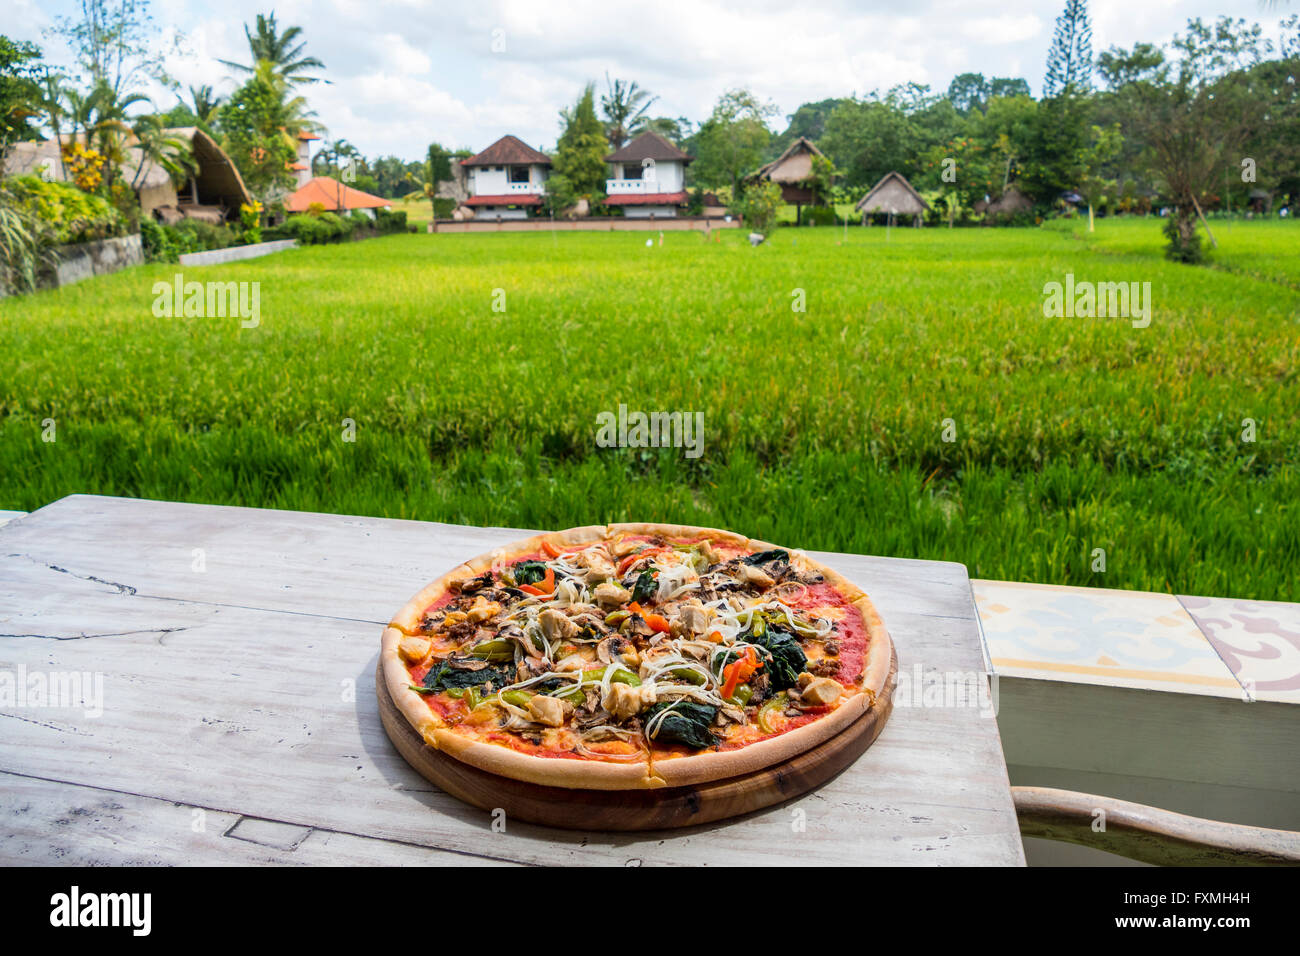 Pizza with Landscape Field at Background, Ubud, Bali, Indonesia Stock Photo